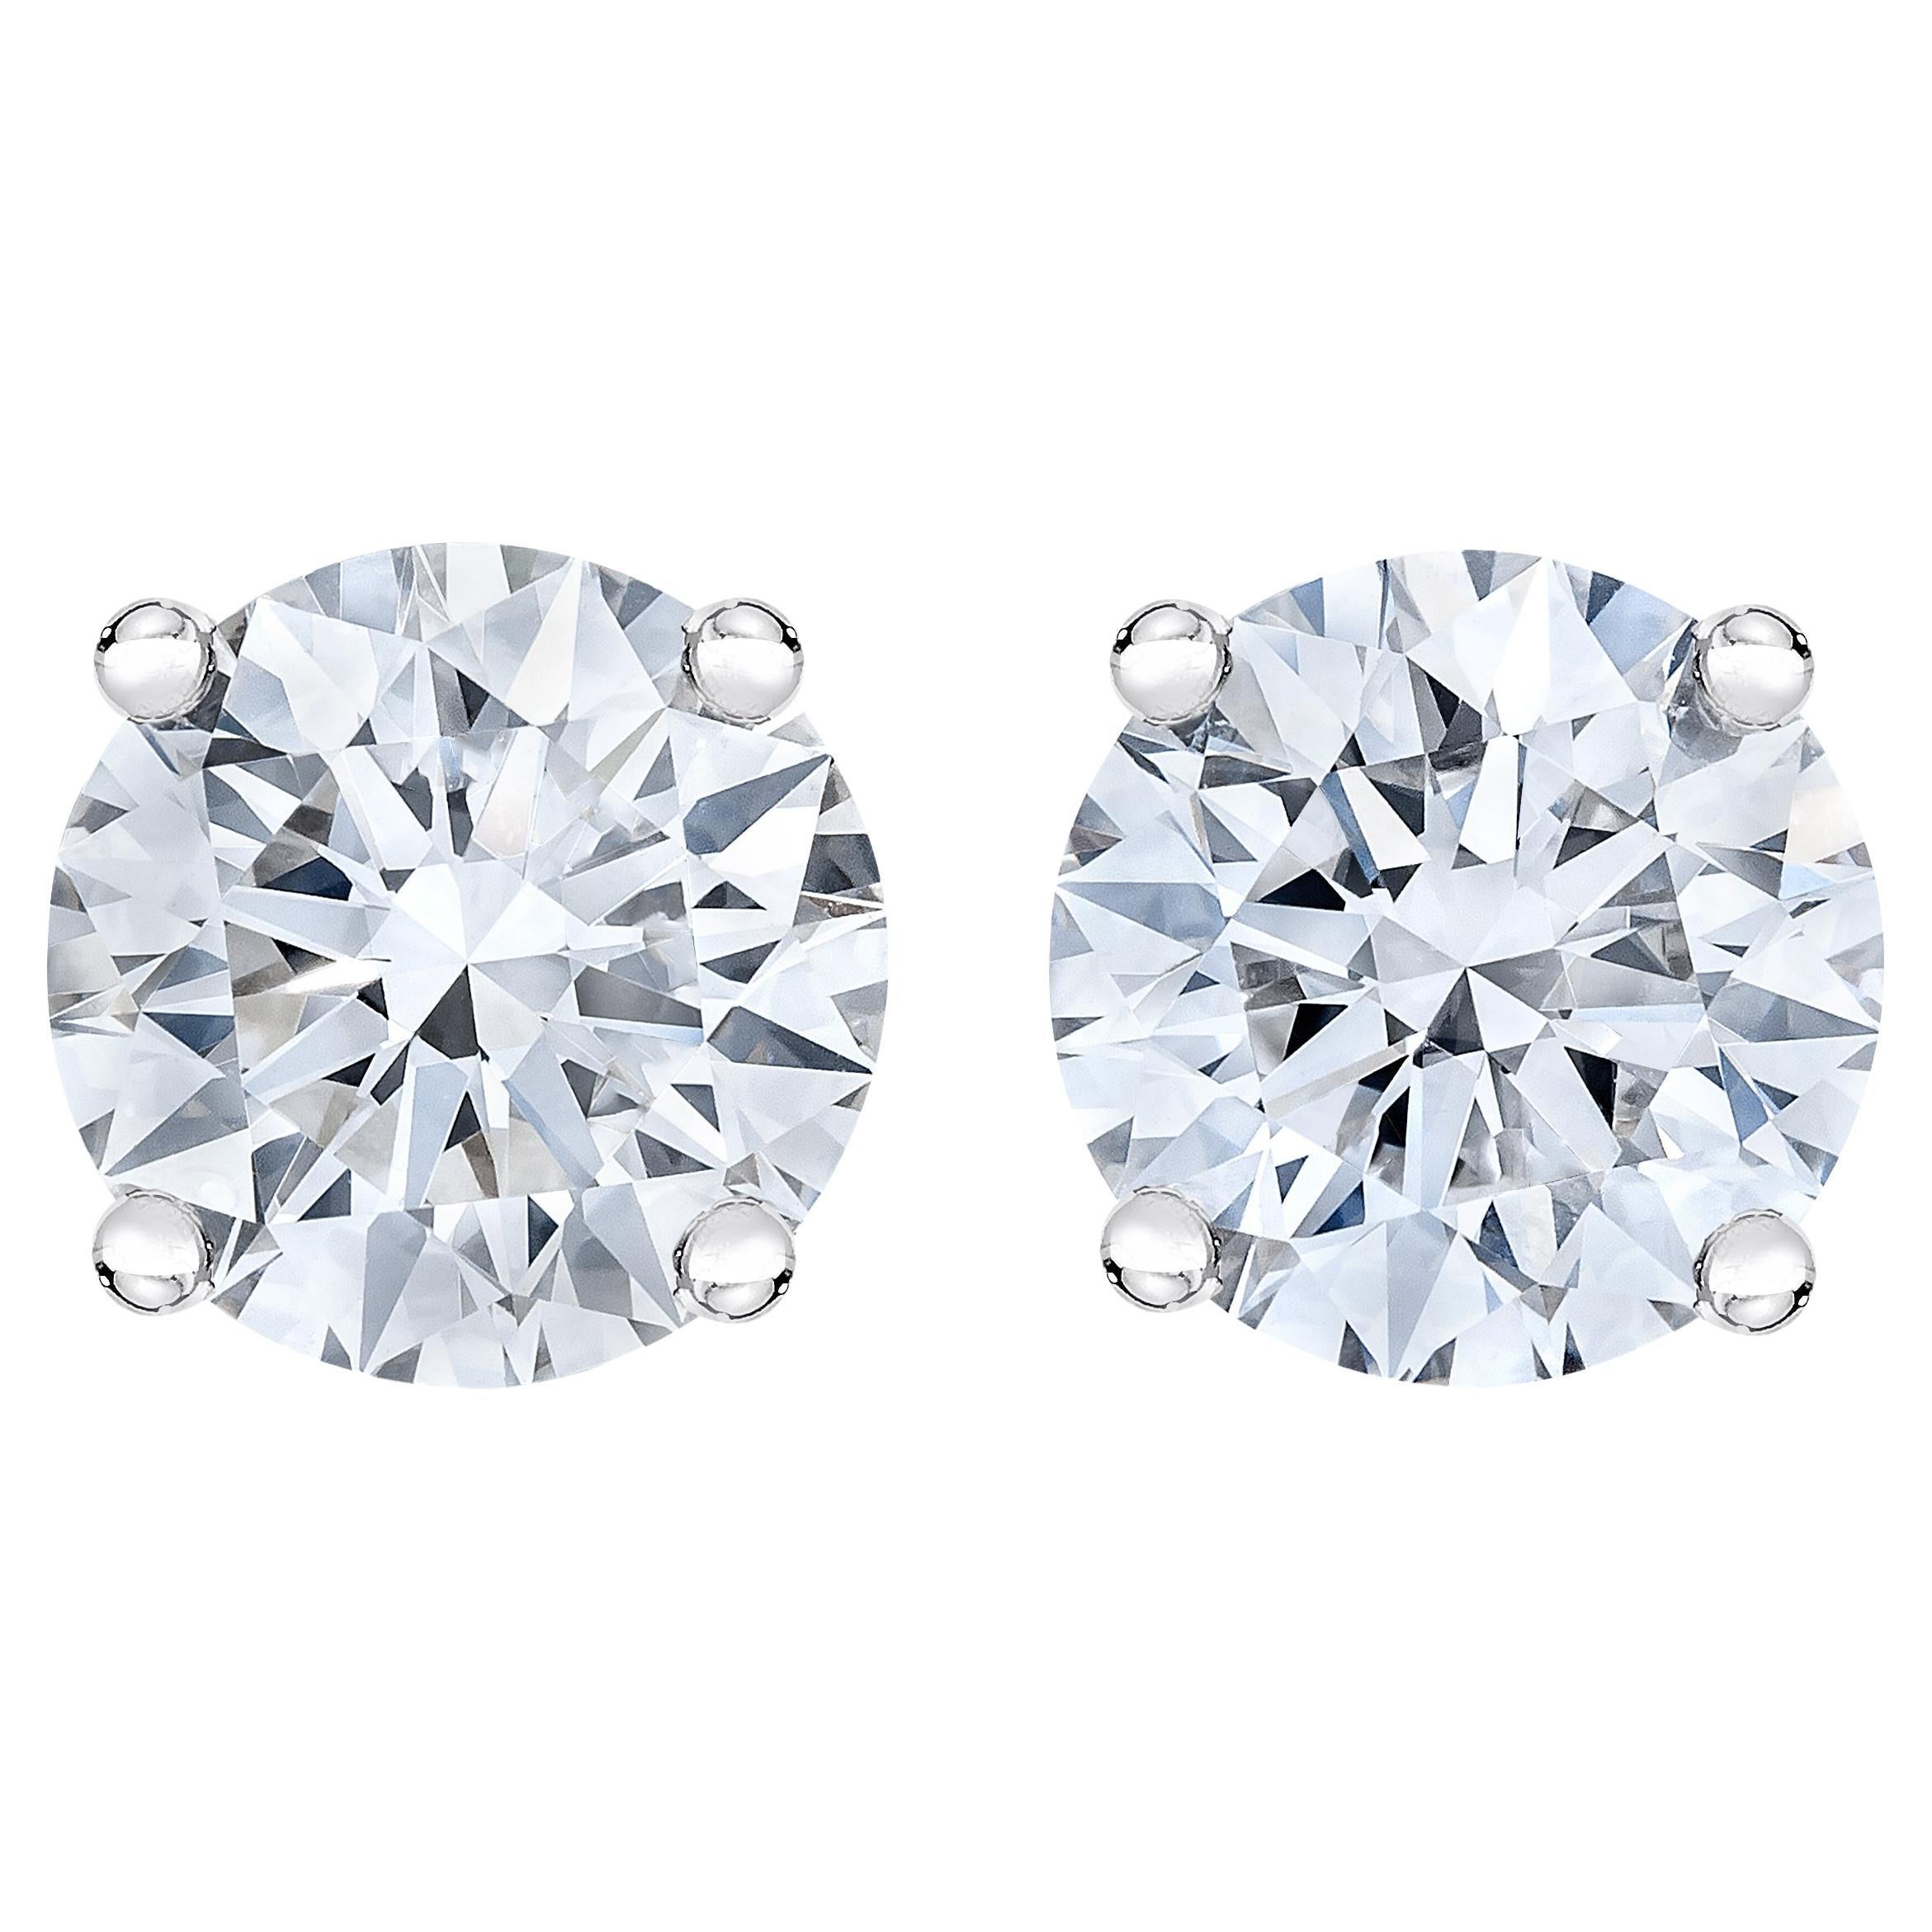 14k White Gold 1.00 Carat Solitaire Diamond Stud Earrings with Screw Backs